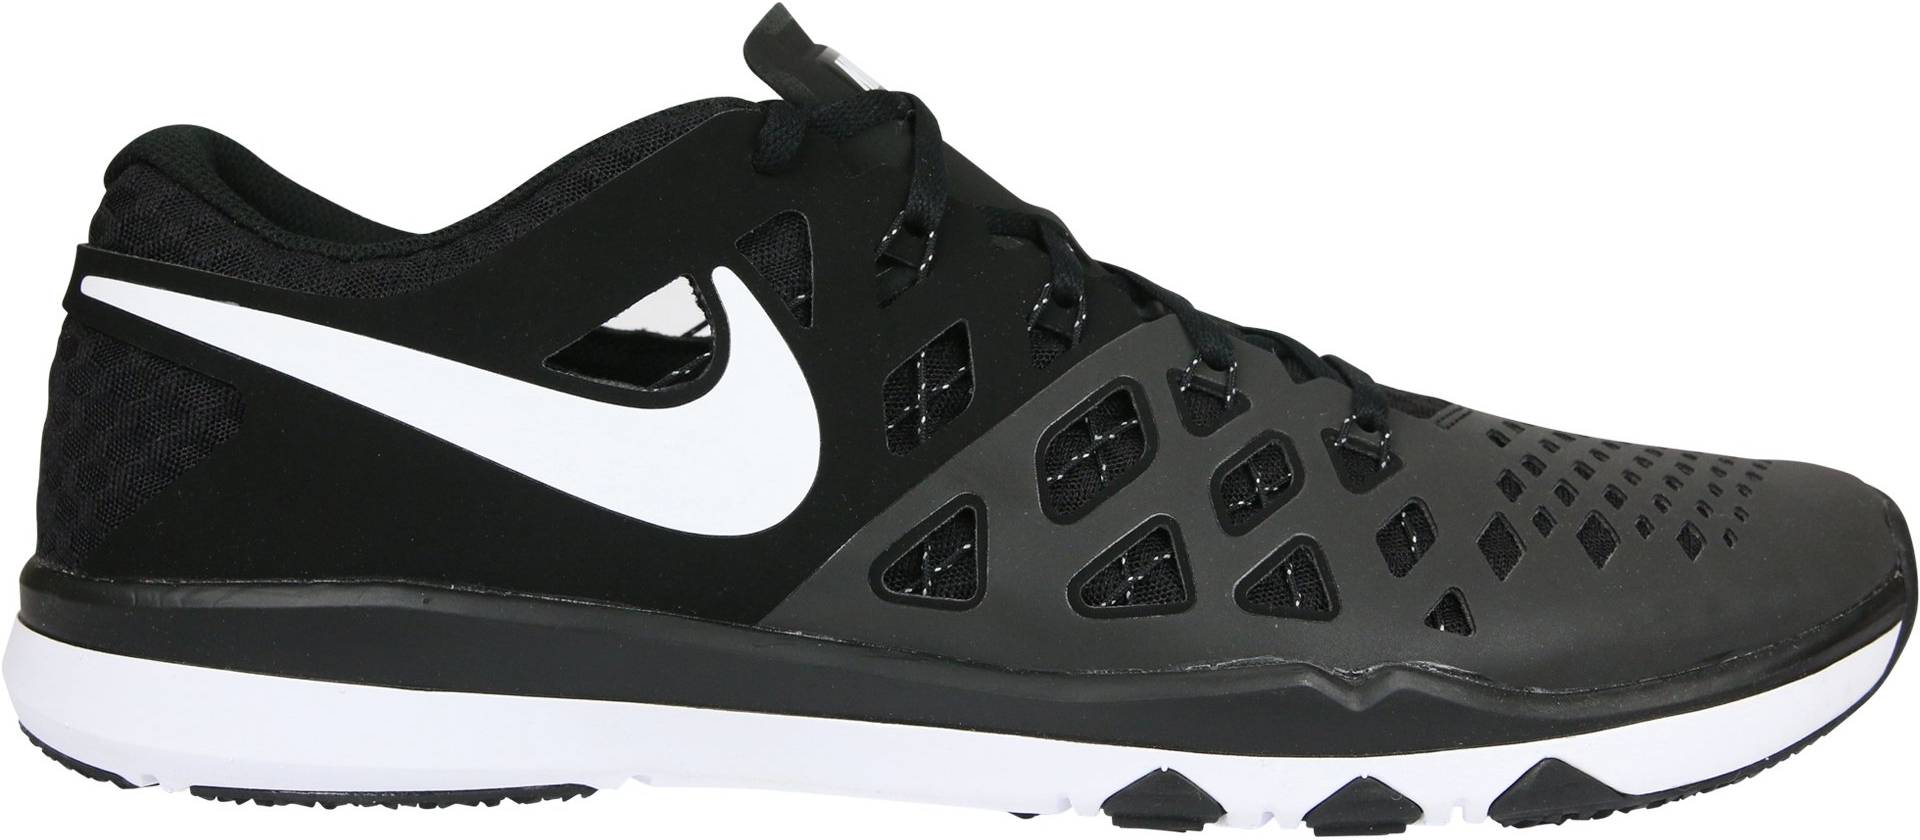 Nike Train Speed 4 Review 2022, Facts, Deals ($78) |